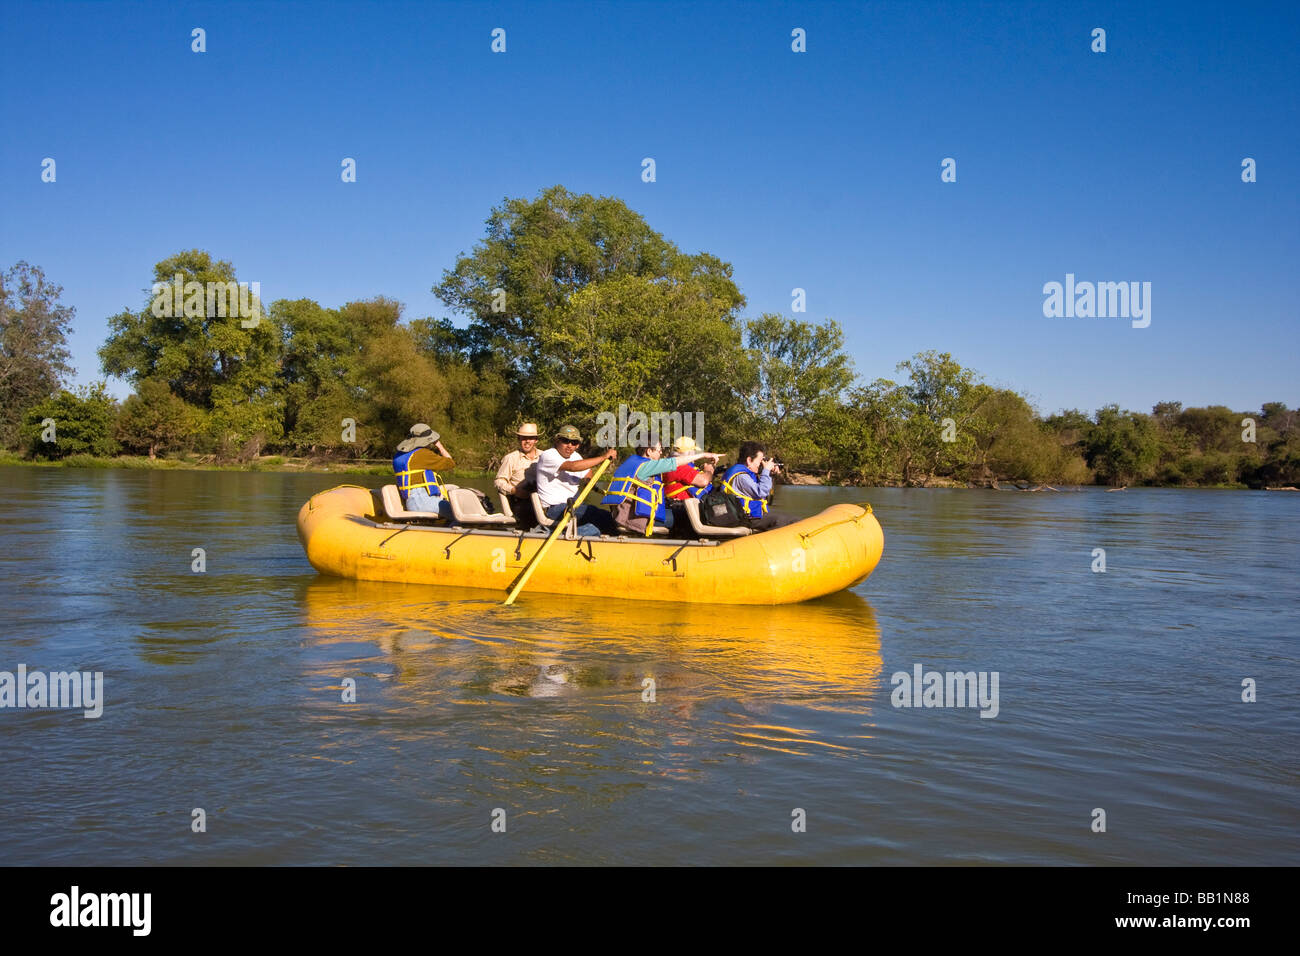 Birdwatching on a raft along the Rio Fuerte near the town of El Fuerte in Sinaloa State Mexico Stock Photo